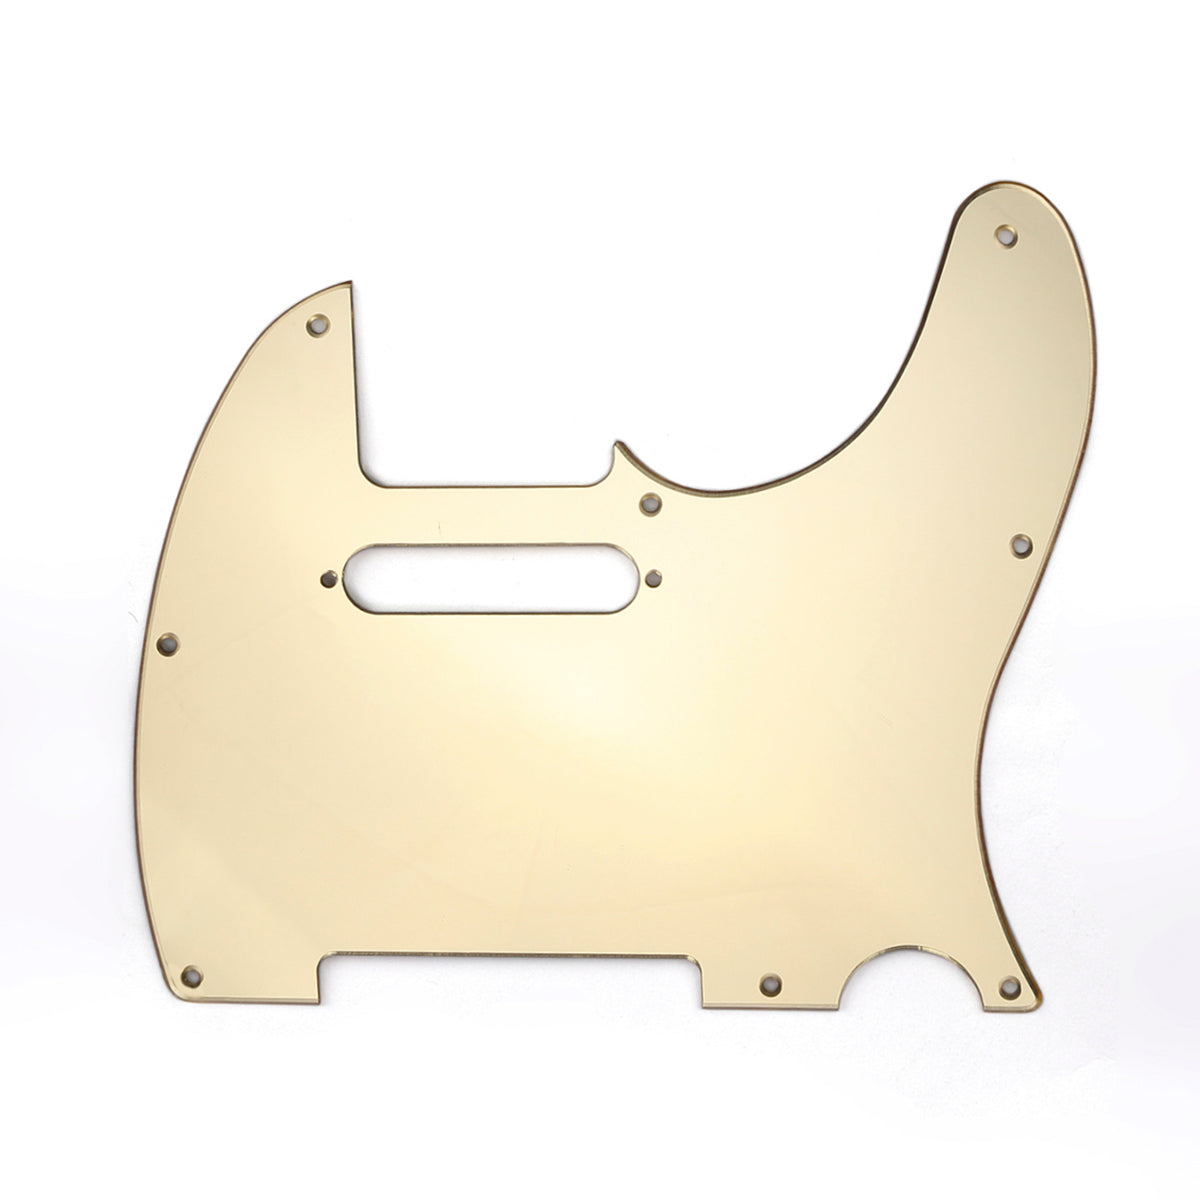 Musiclily 8 Hole Tele Guitar Pickguard for USA/Mexican Made Fender Standard Telecaster Modern Style, 1Ply Gold Mirror Acrylic